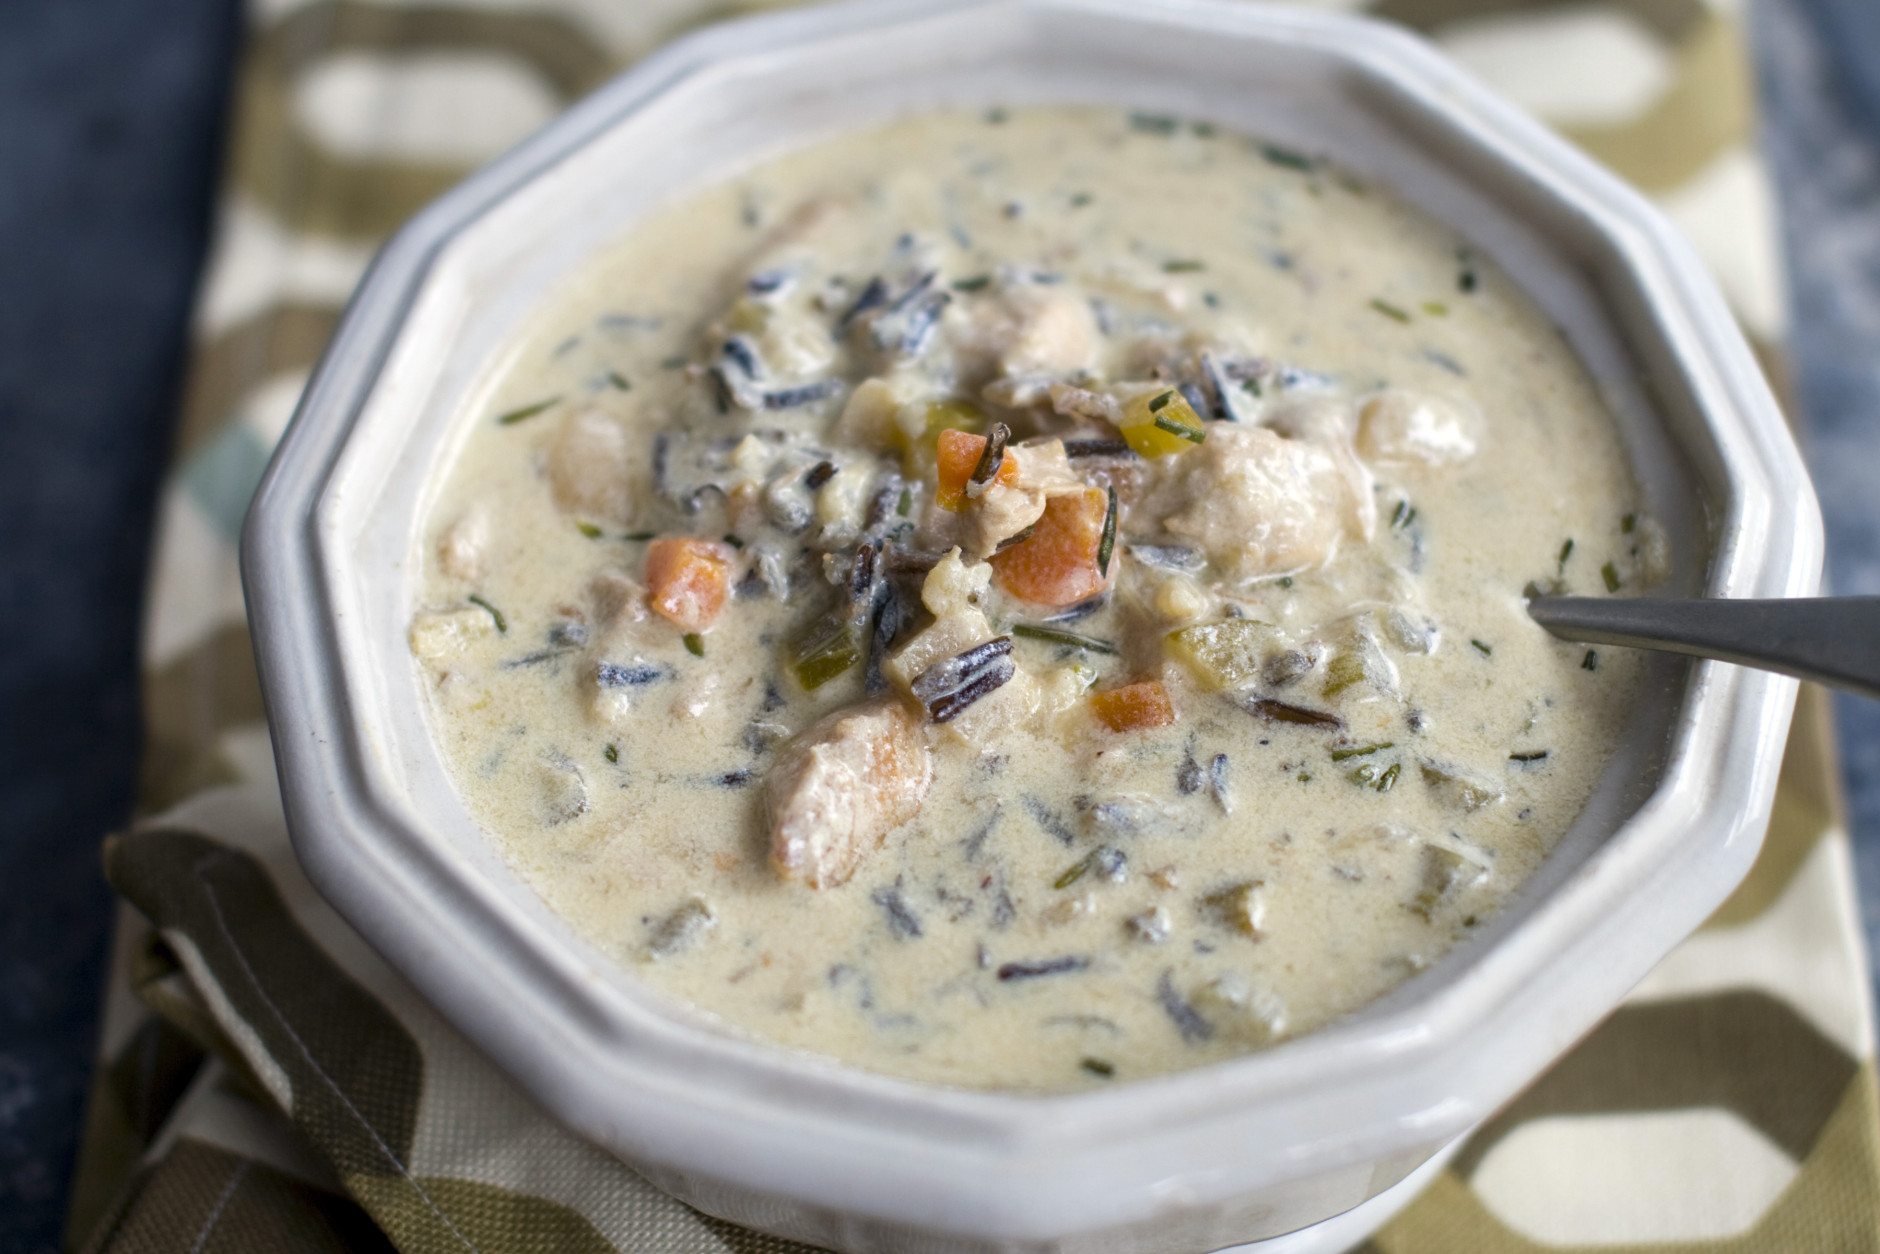 This Nov. 14, 2011 photo shows creamy rosemary wild rice soup in Concord, N.H. Creamy in texture without being cream-based, this soup satisfies with vegetables, wild rice and rosemary.    (AP Photo/Matthew Mead)